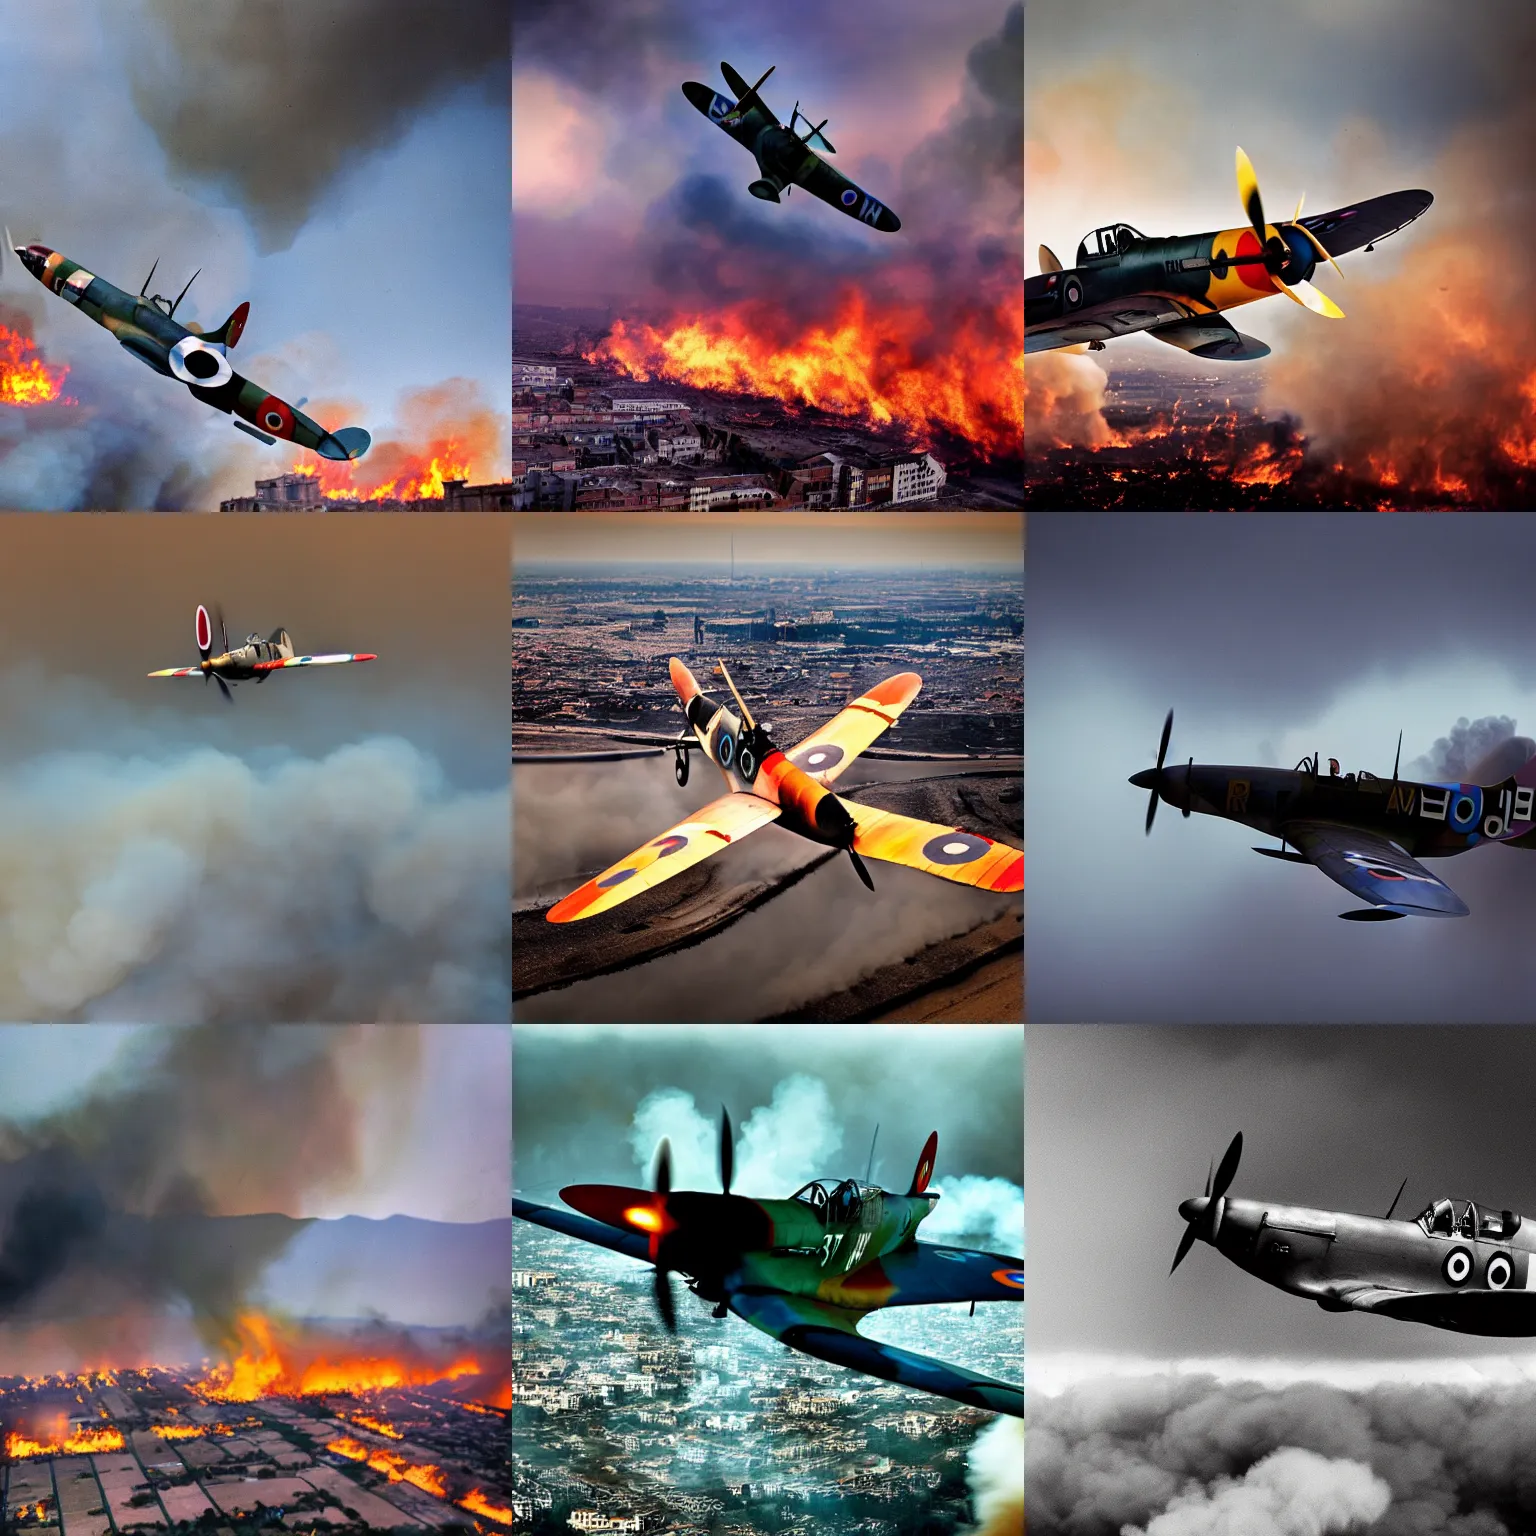 Prompt: landscape photograph of a spitfire, flying over a destroyed smoking burning city, color, reflections, motion blur, atmospheric, award winning photo